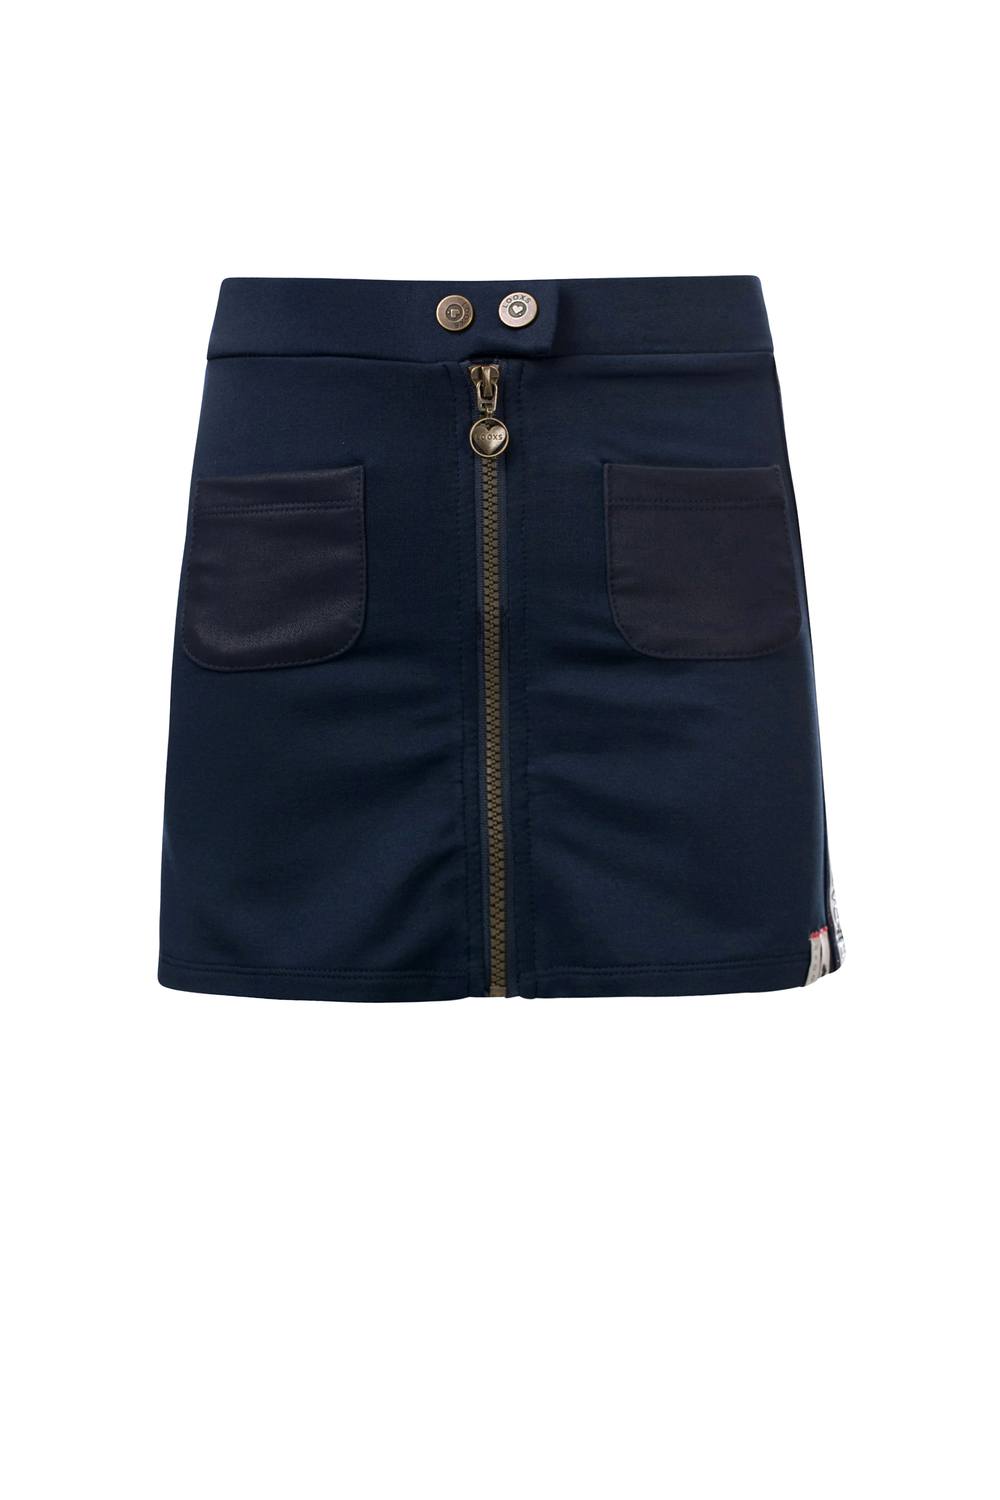 Loox's Revol. Skirt with zip and trim